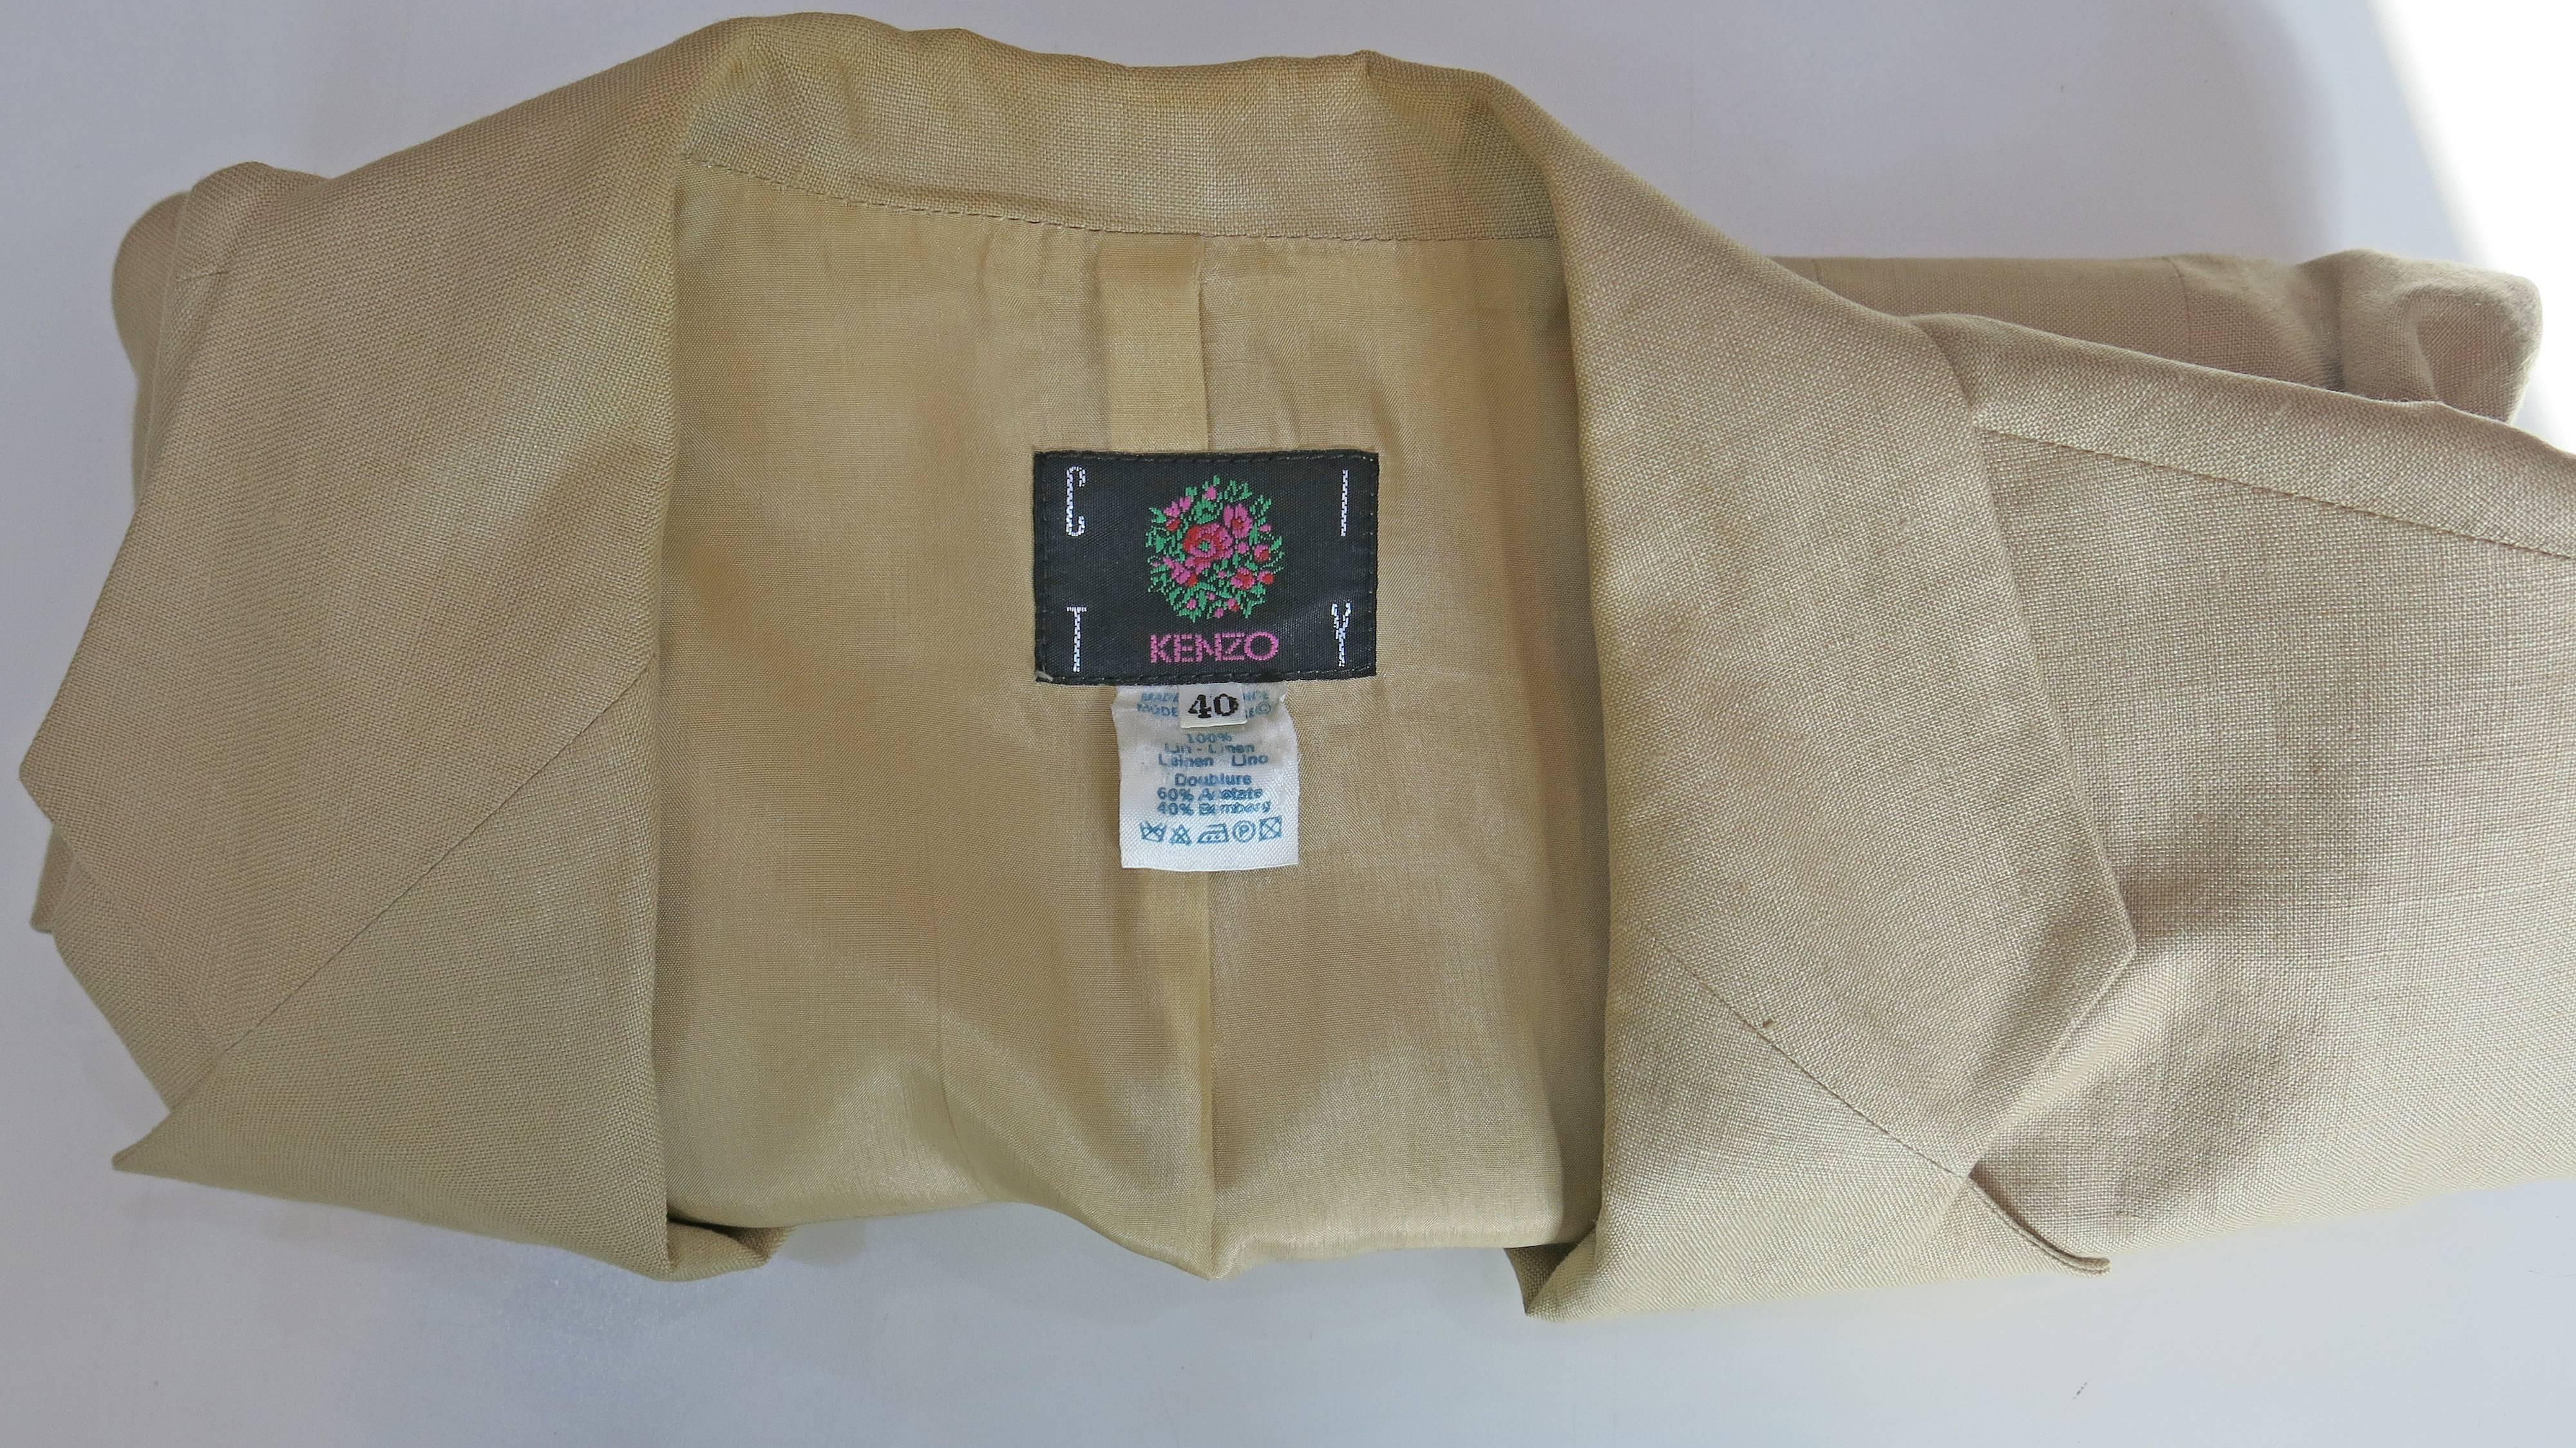 Kenzo Camel Linen Blazer Size 10, 1990s   In Fair Condition For Sale In Brooklyn, NY